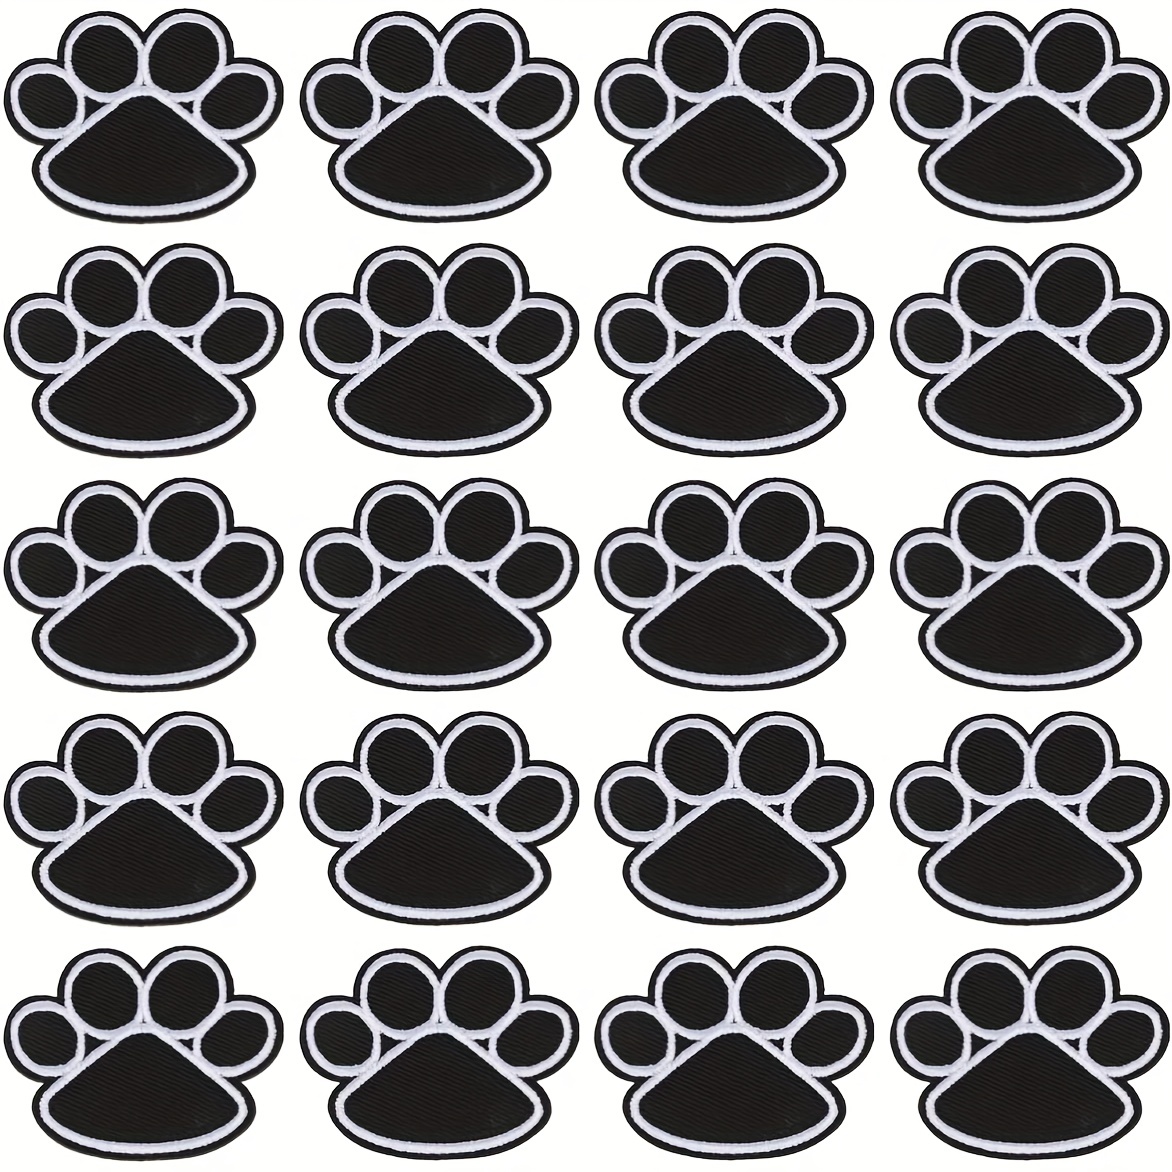 

10pcs Black Cat Paw Dog Paw Cute Embroidery Applique Patch Cartoon Cloth Patches With Adhesive Backing For Jackets, Sew On Patches For Clothing Backpacks Jeans T-shirt